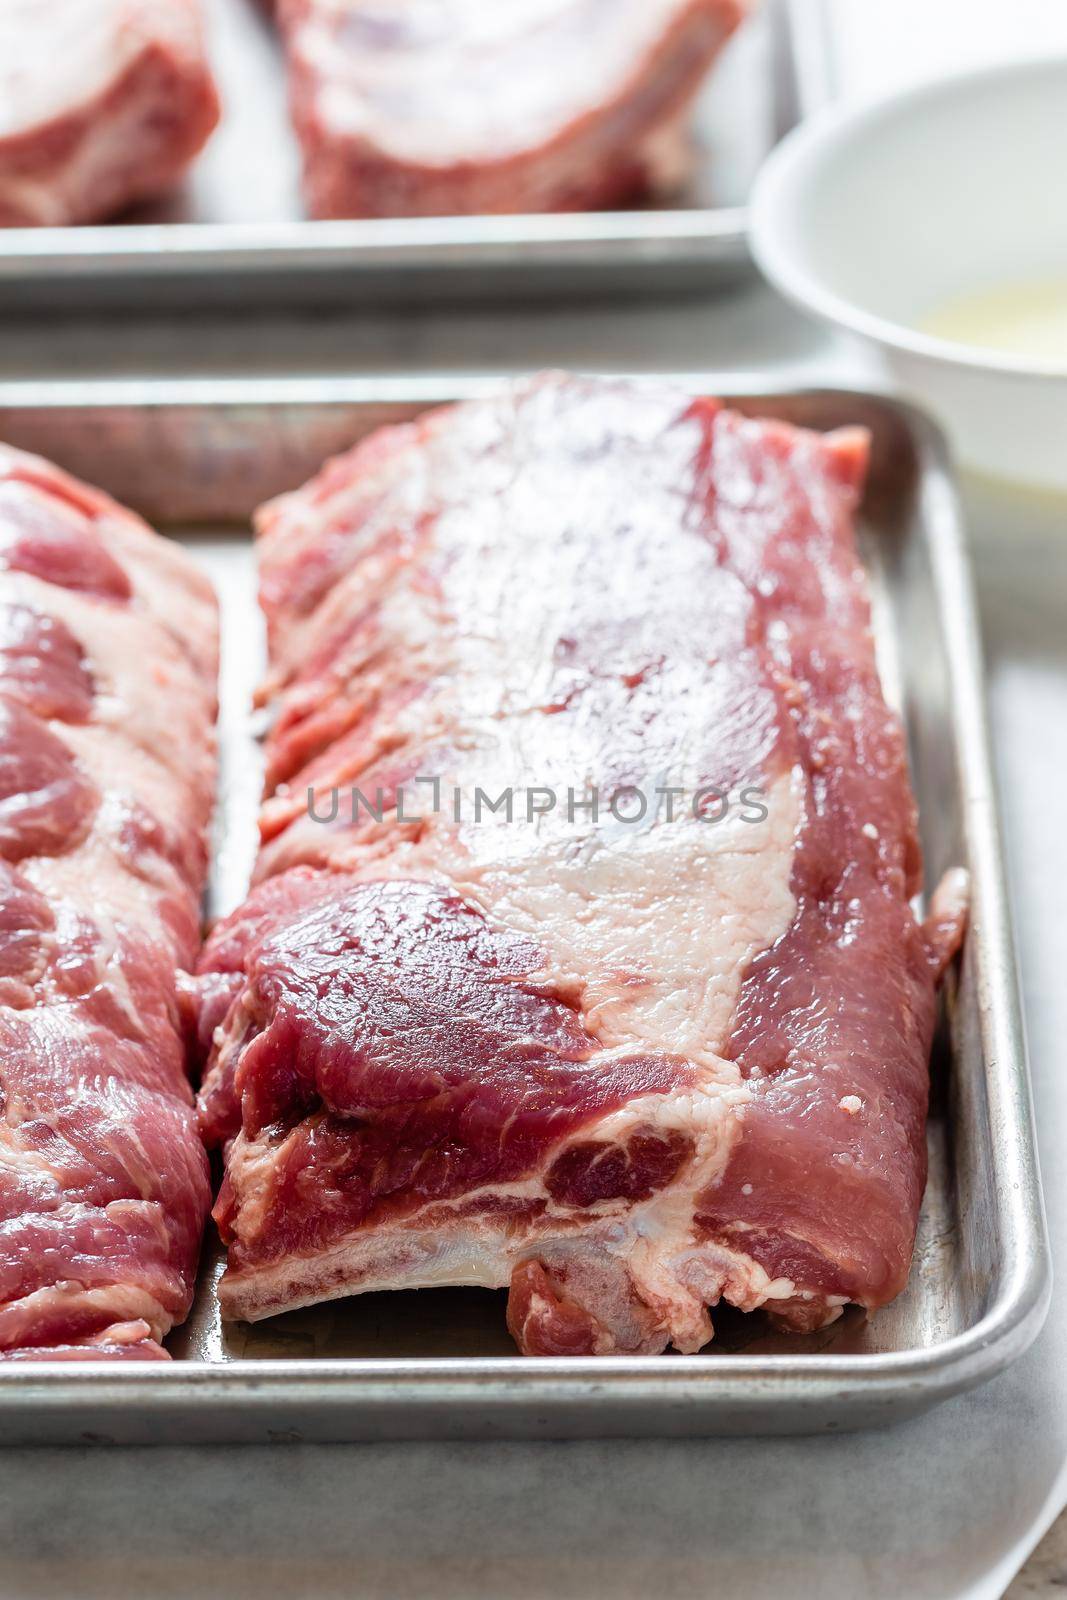 Spare ribs uncooked on stainless steel platter. Preparing bbq ribs dinner